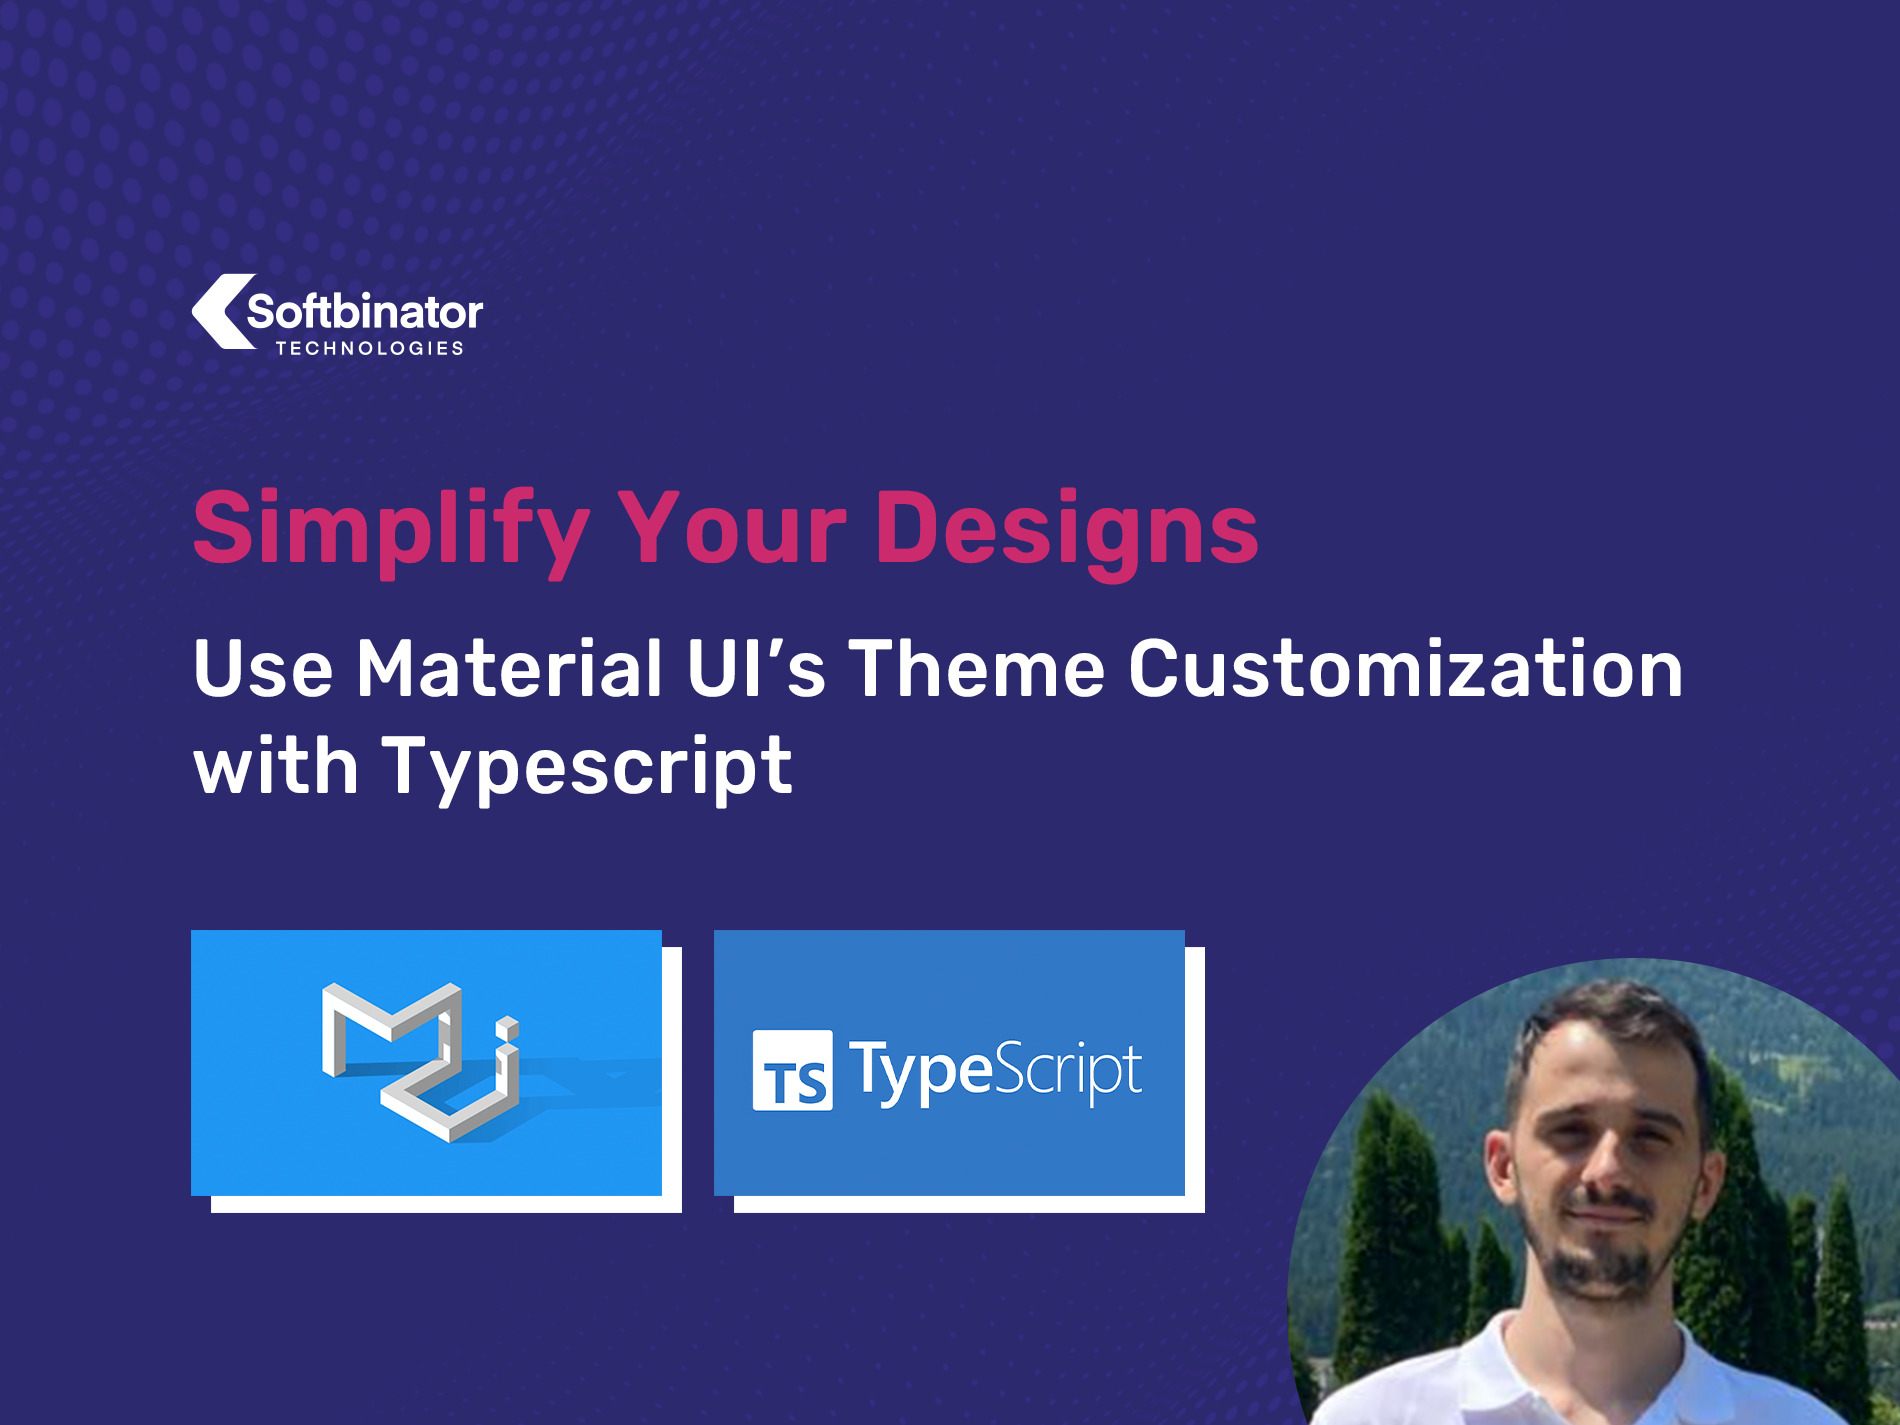 Simplify Your Designs - Use Material UI’s Theme Customization with Typescript